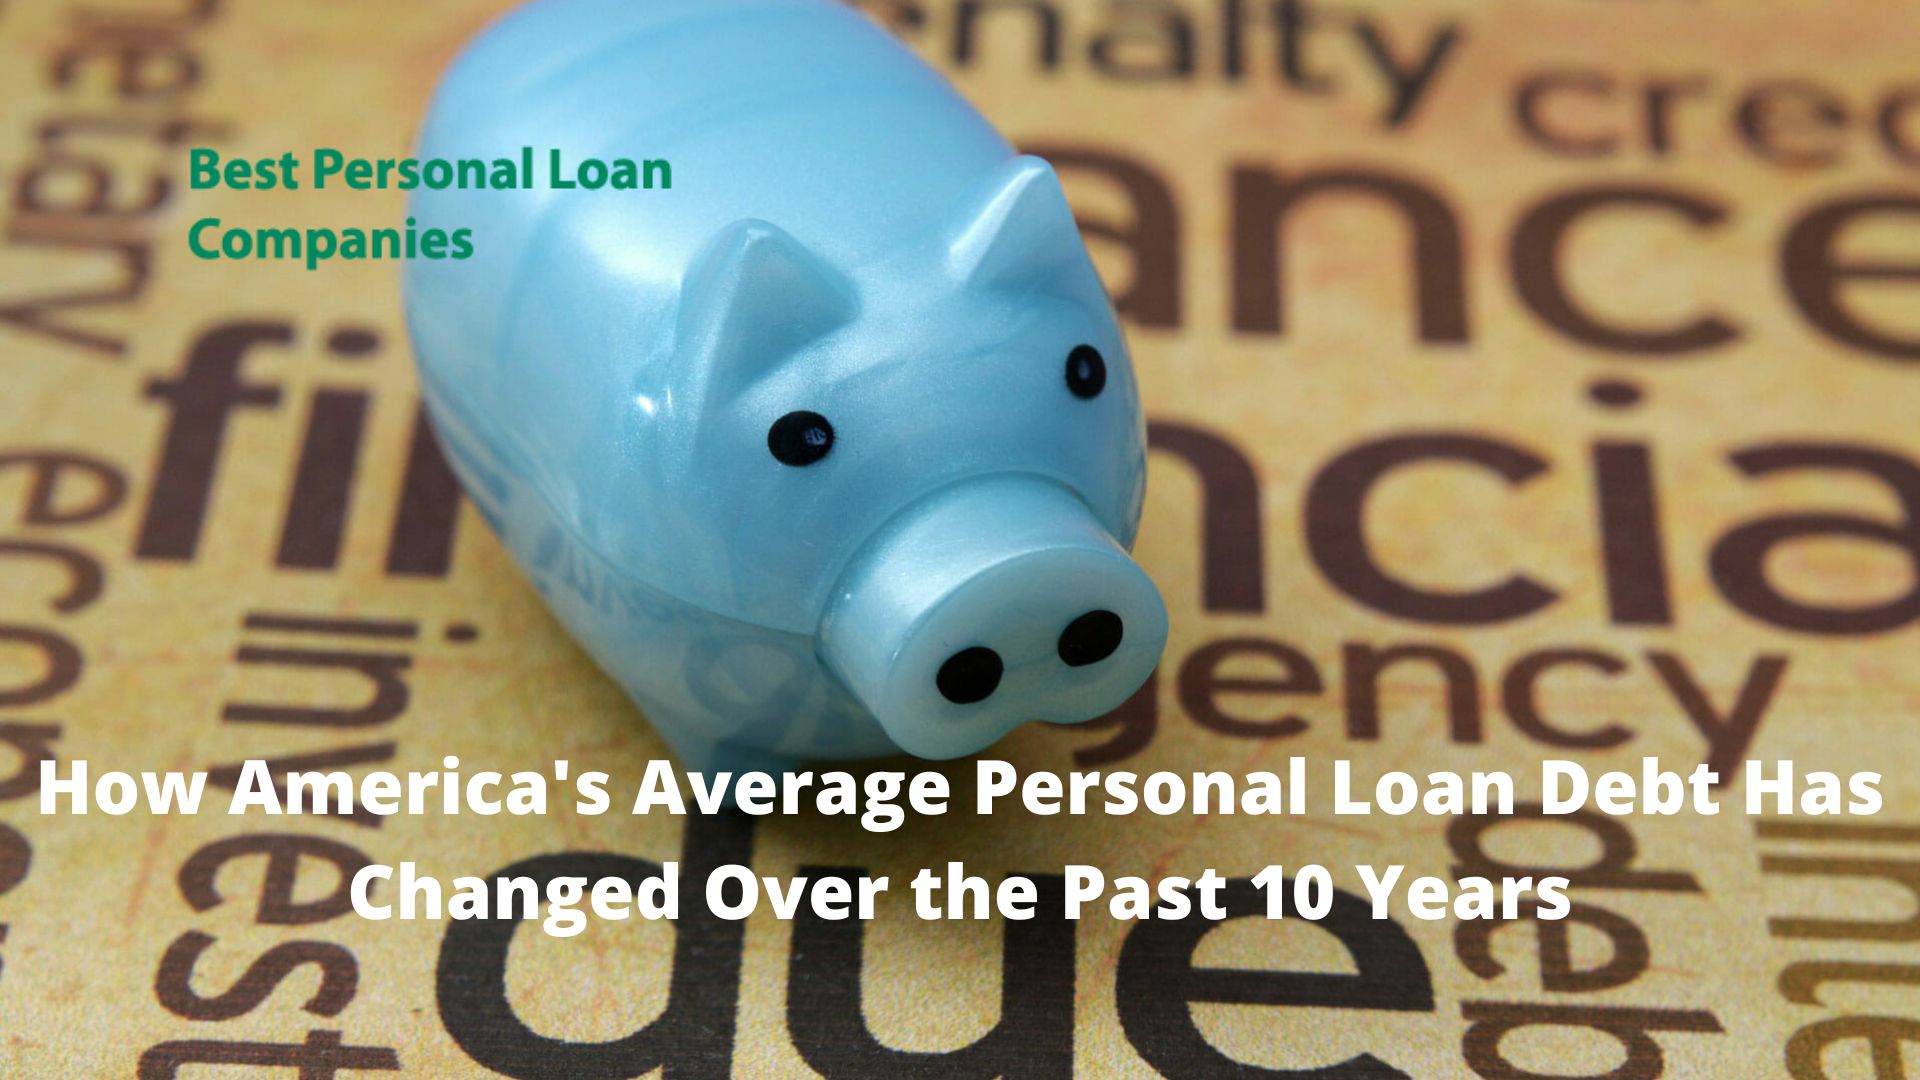 How America's Average Personal Loan Debt Has Changed Over the Past 10 Years